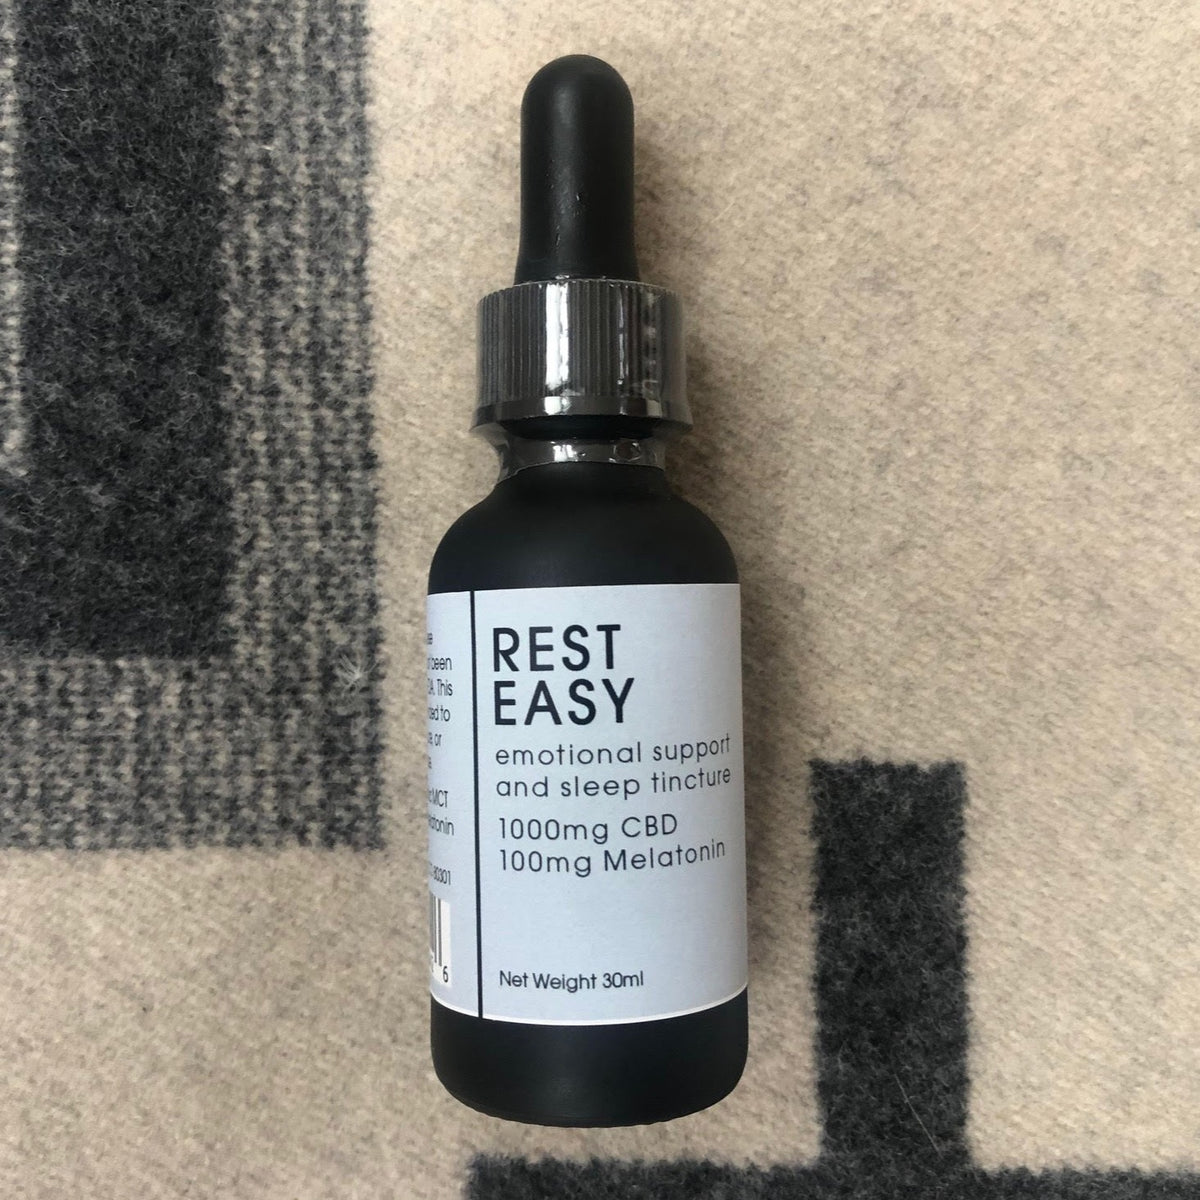 Rest Easy Emotional Support and Sleep Tincture - 1000mg CBD